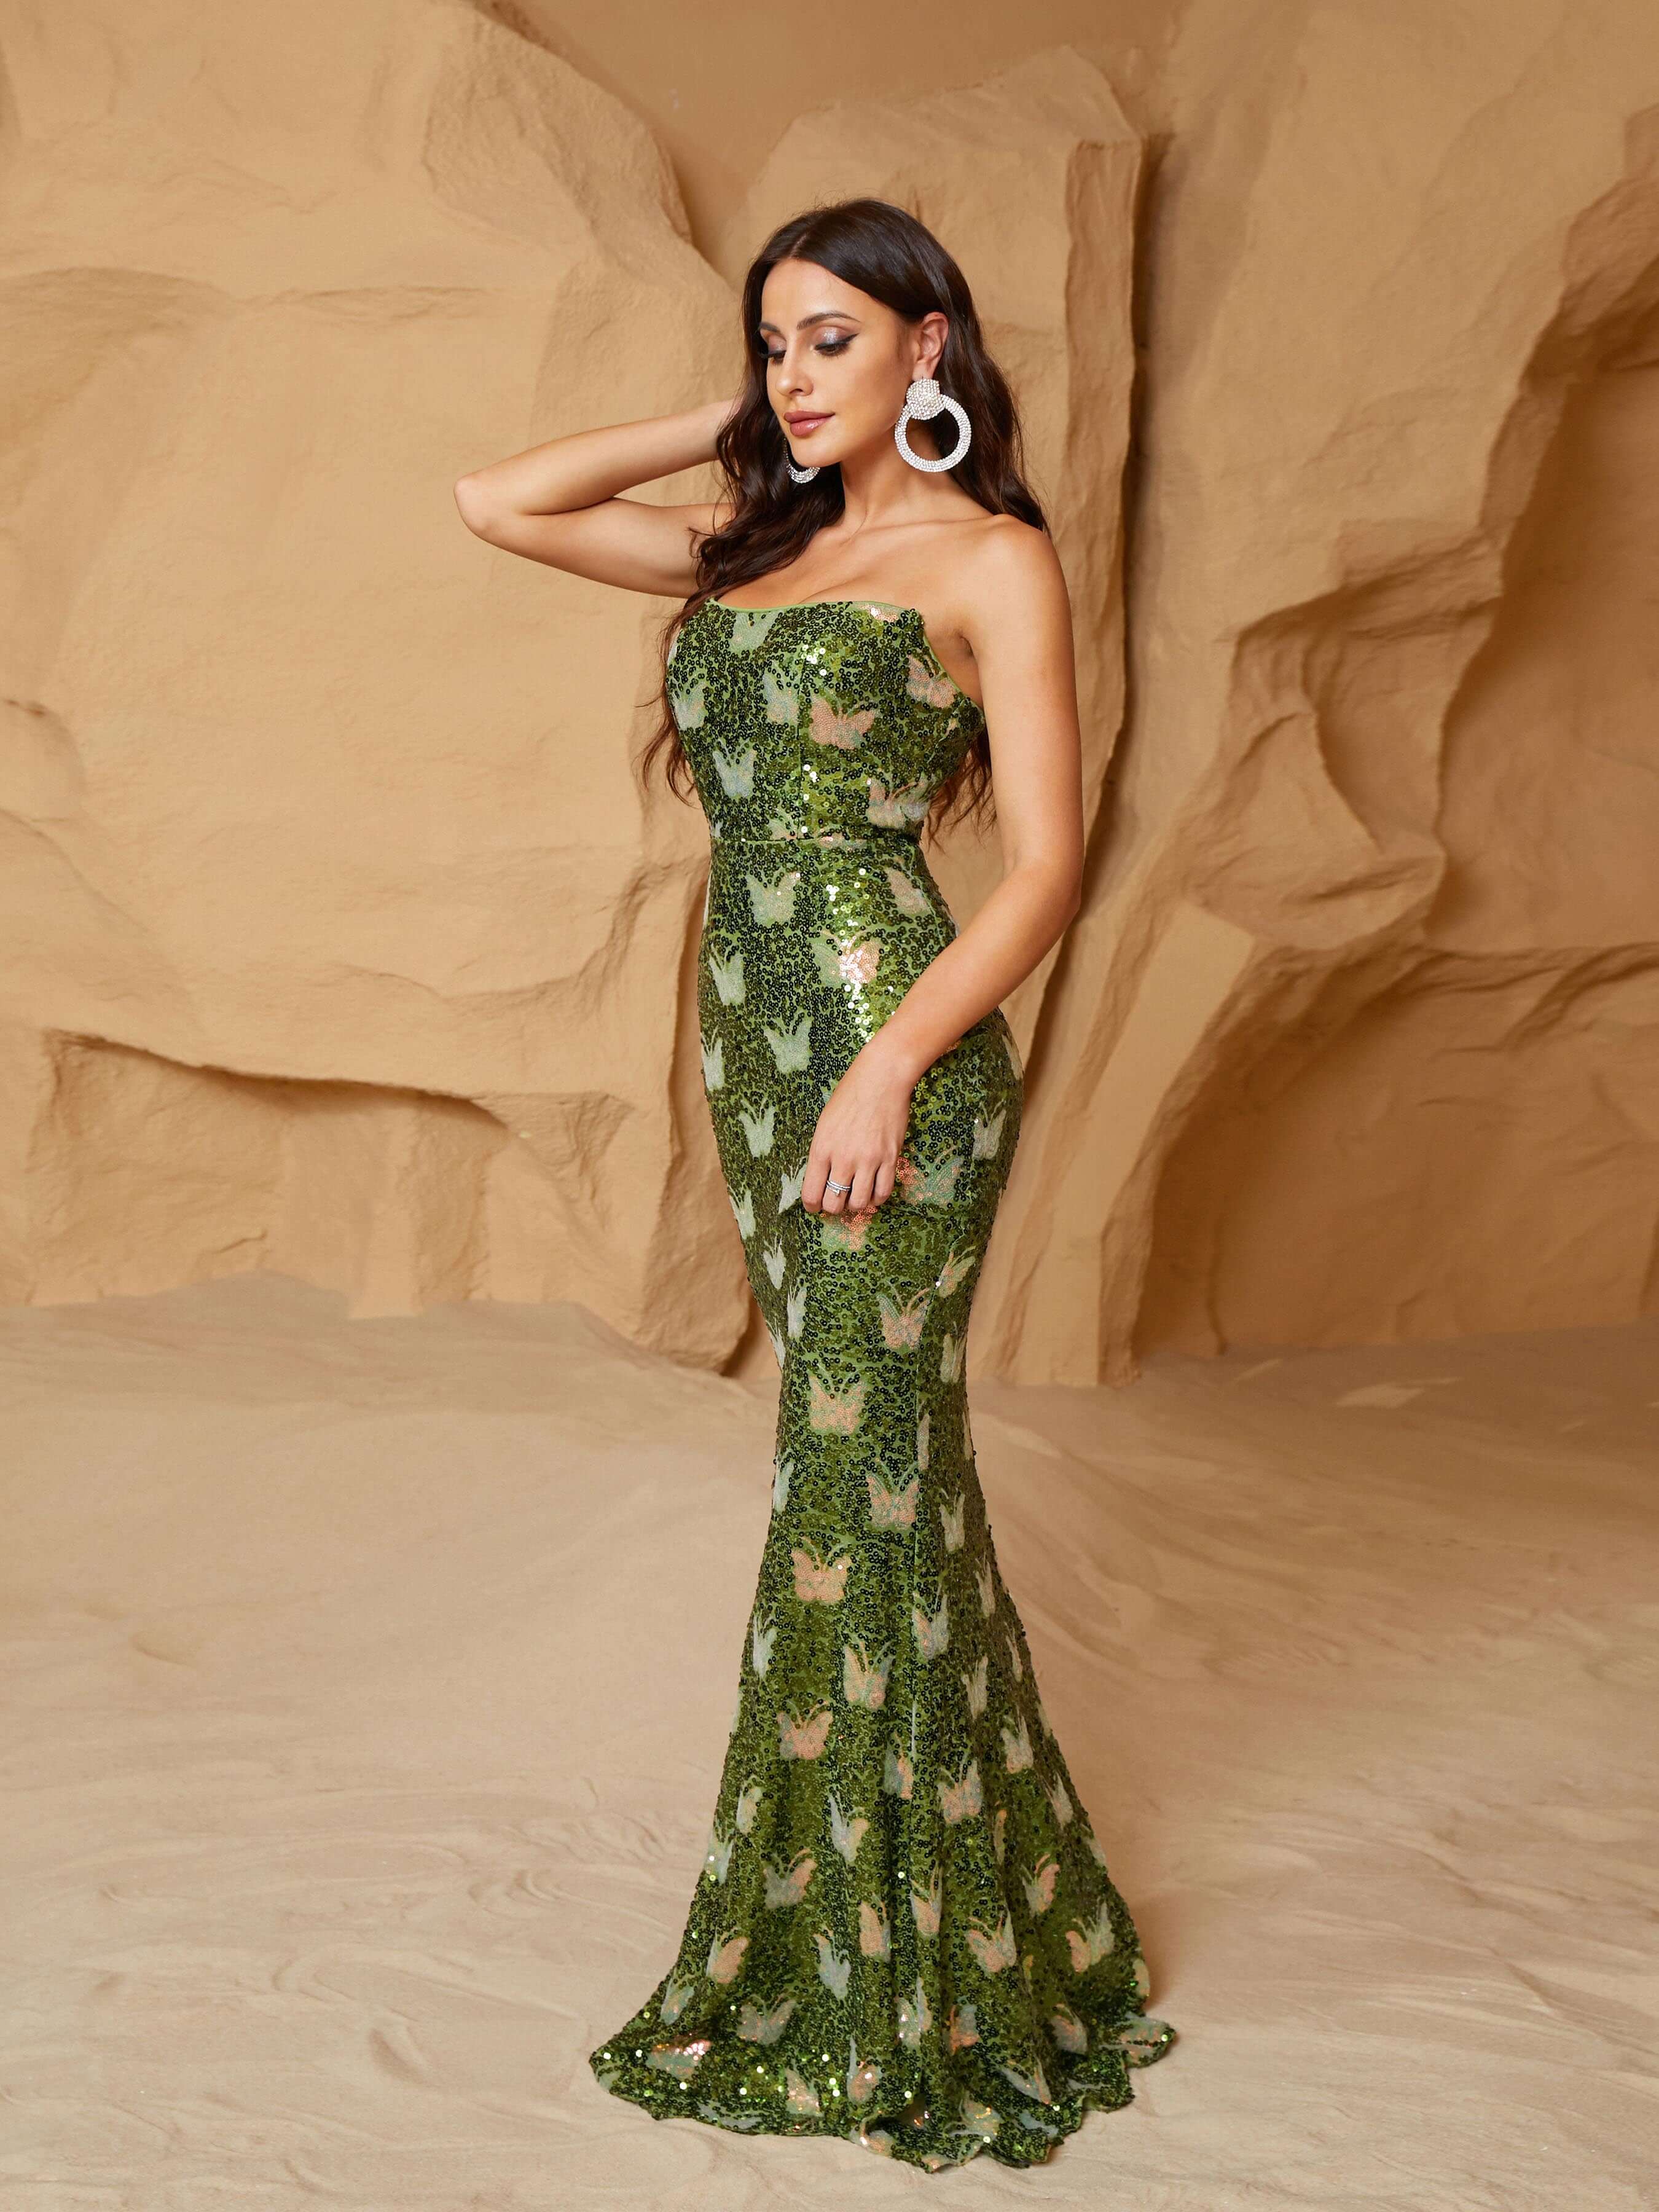 MISSORD Tube Top Backless Green Sequin Prom Dress